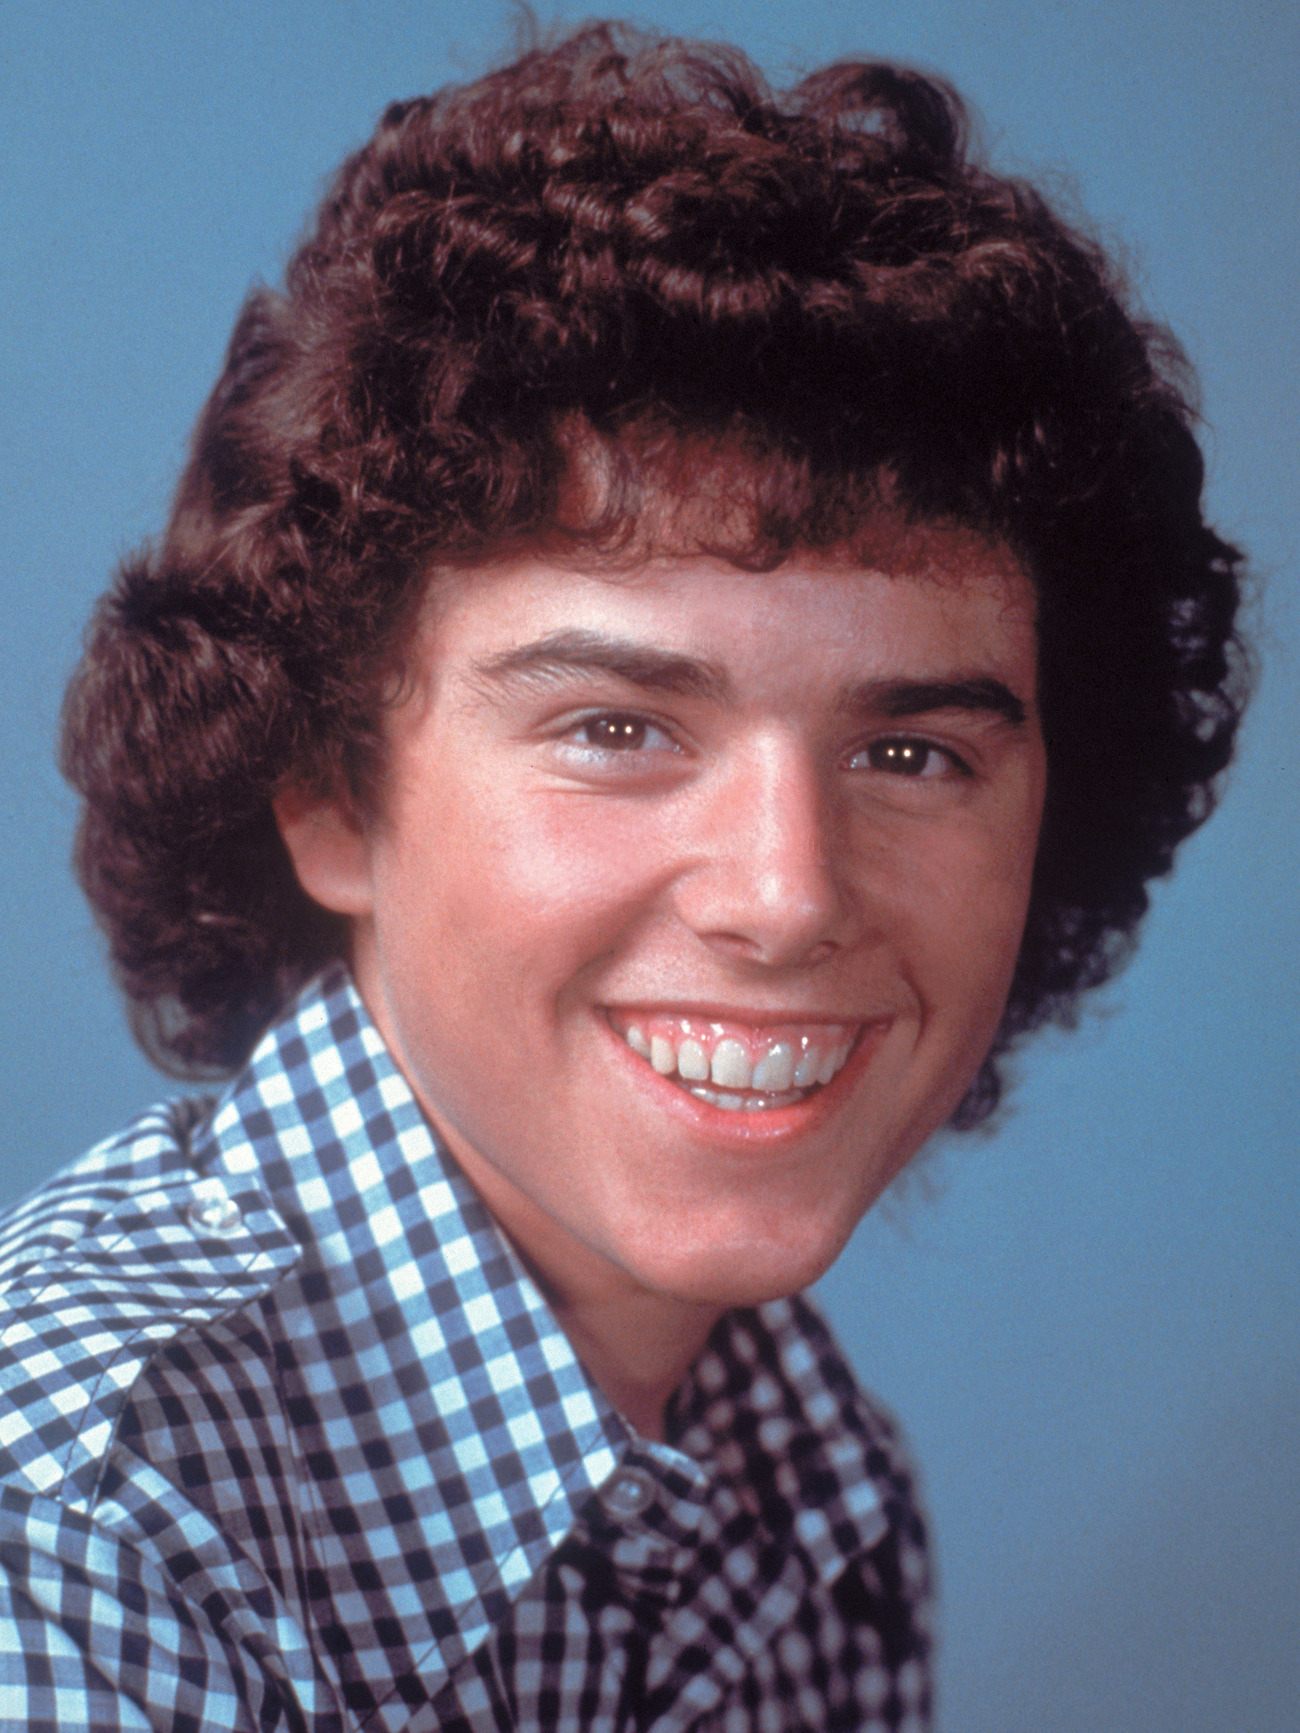 Christopher Knight as a young actor